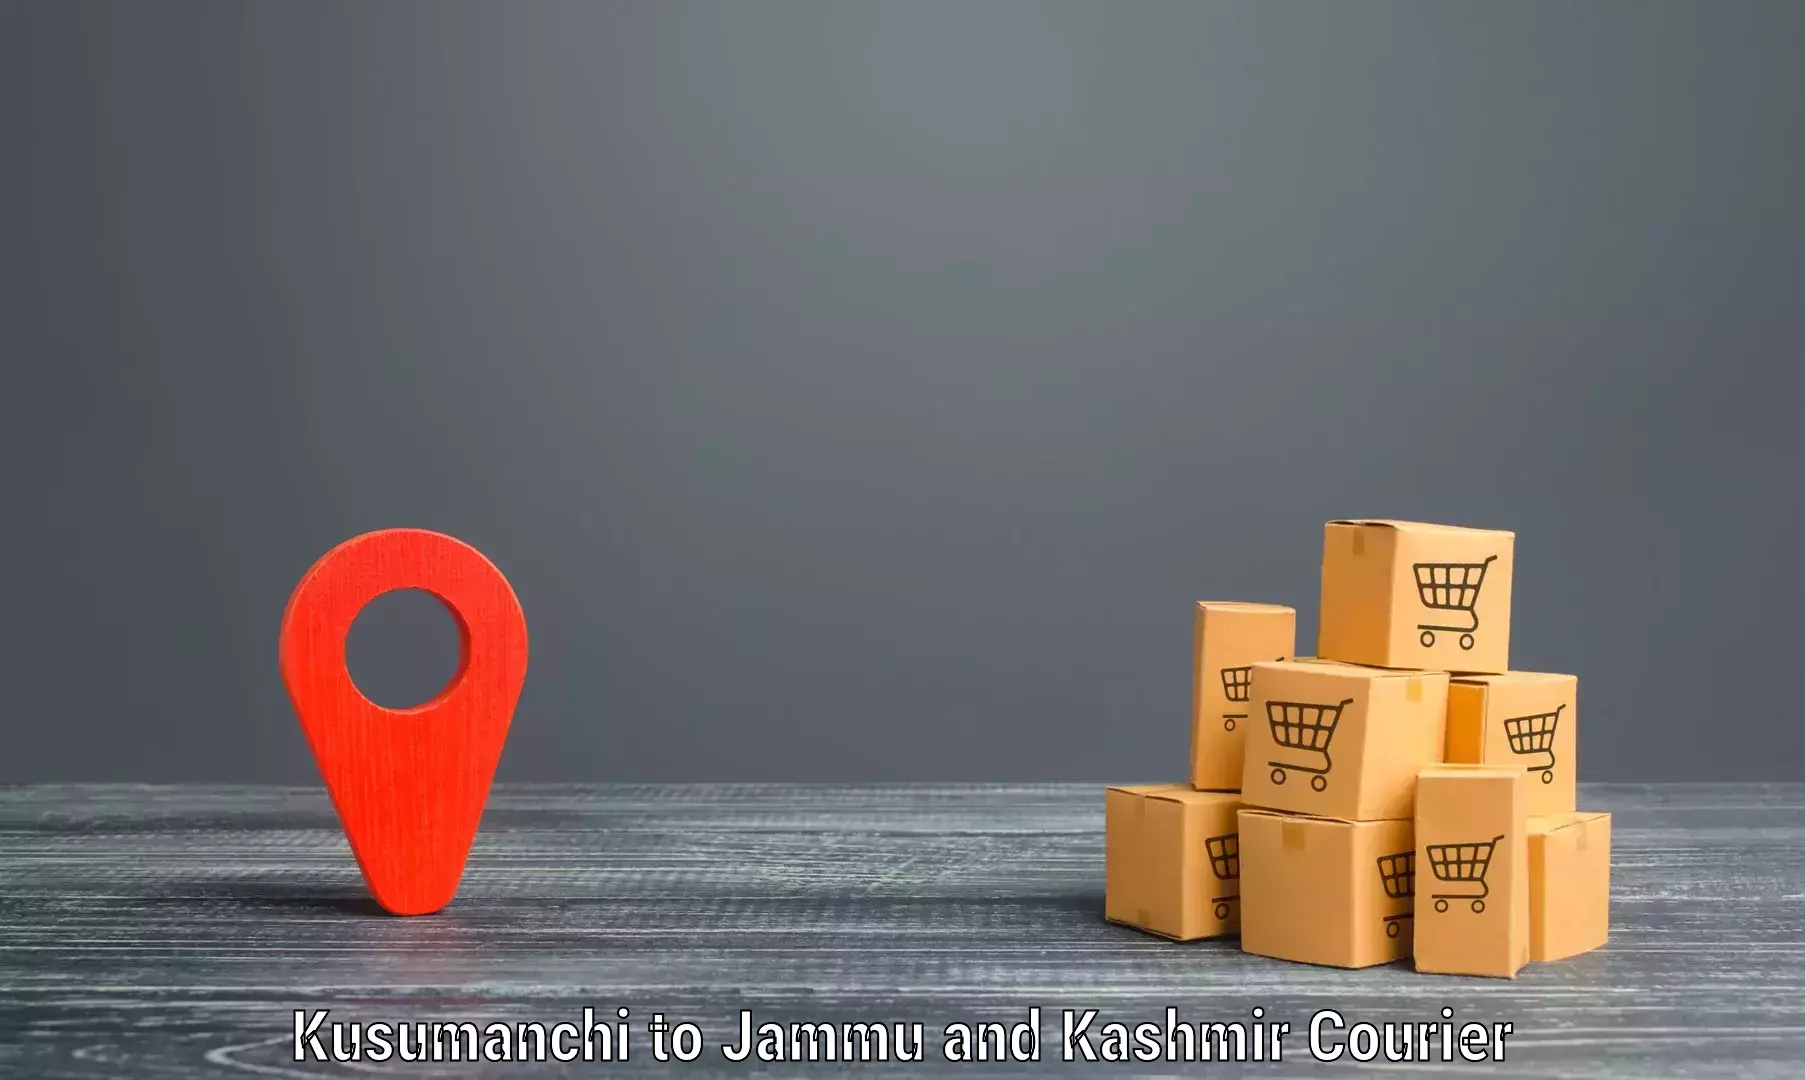 Package delivery network Kusumanchi to Shopian